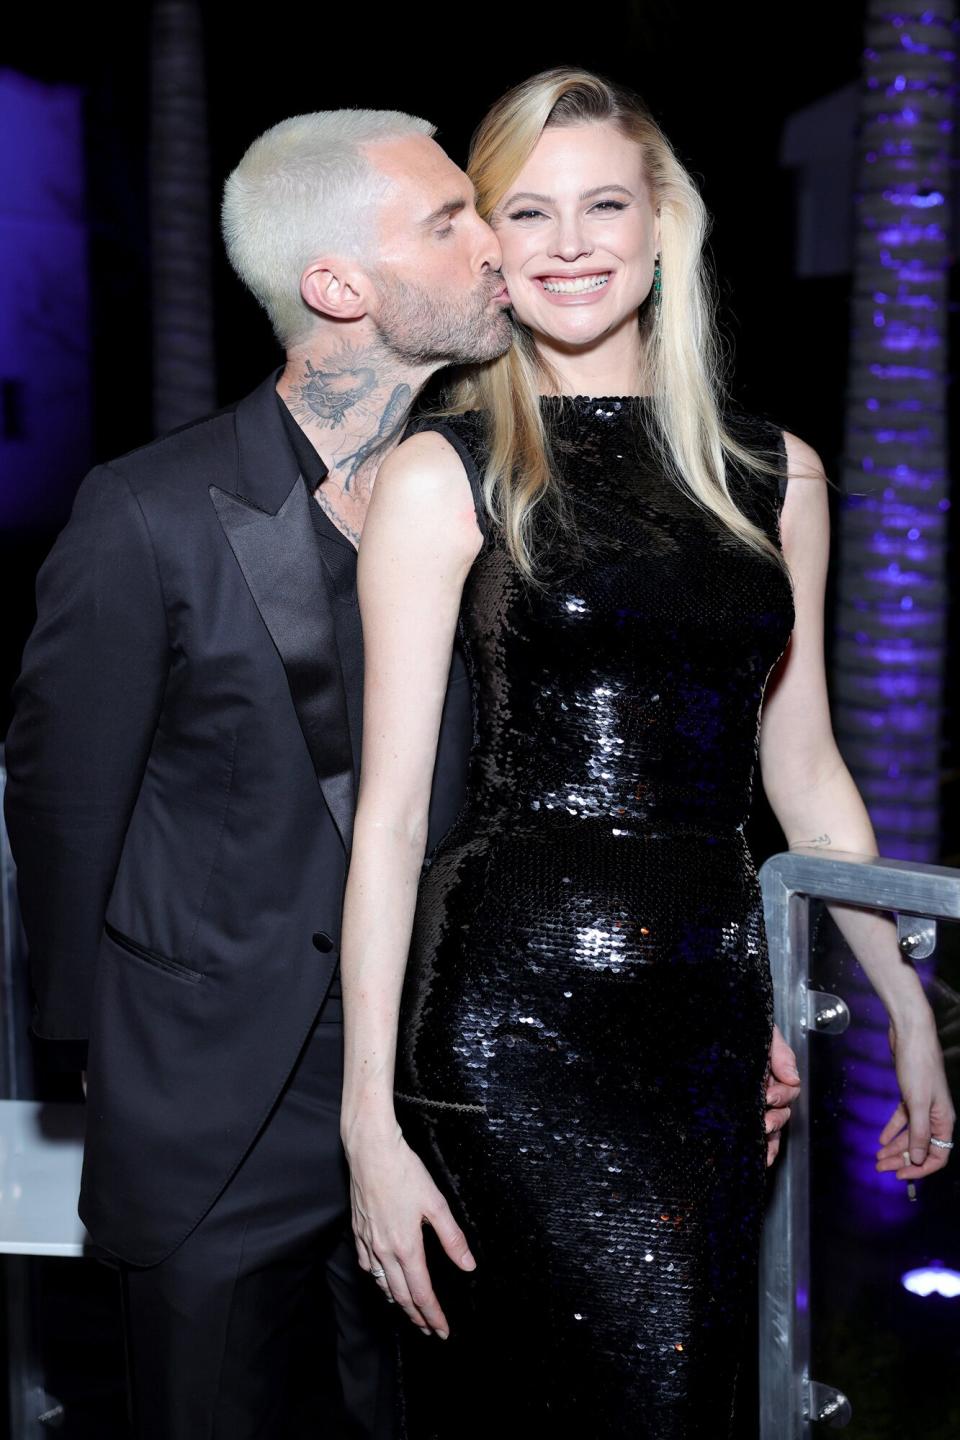 Adam Levine and Behati Prinsloo attend the 2023 Vanity Fair Oscar Party Hosted By Radhika Jones at Wallis Annenberg Center for the Performing Arts on March 12, 2023 in Beverly Hills, California.